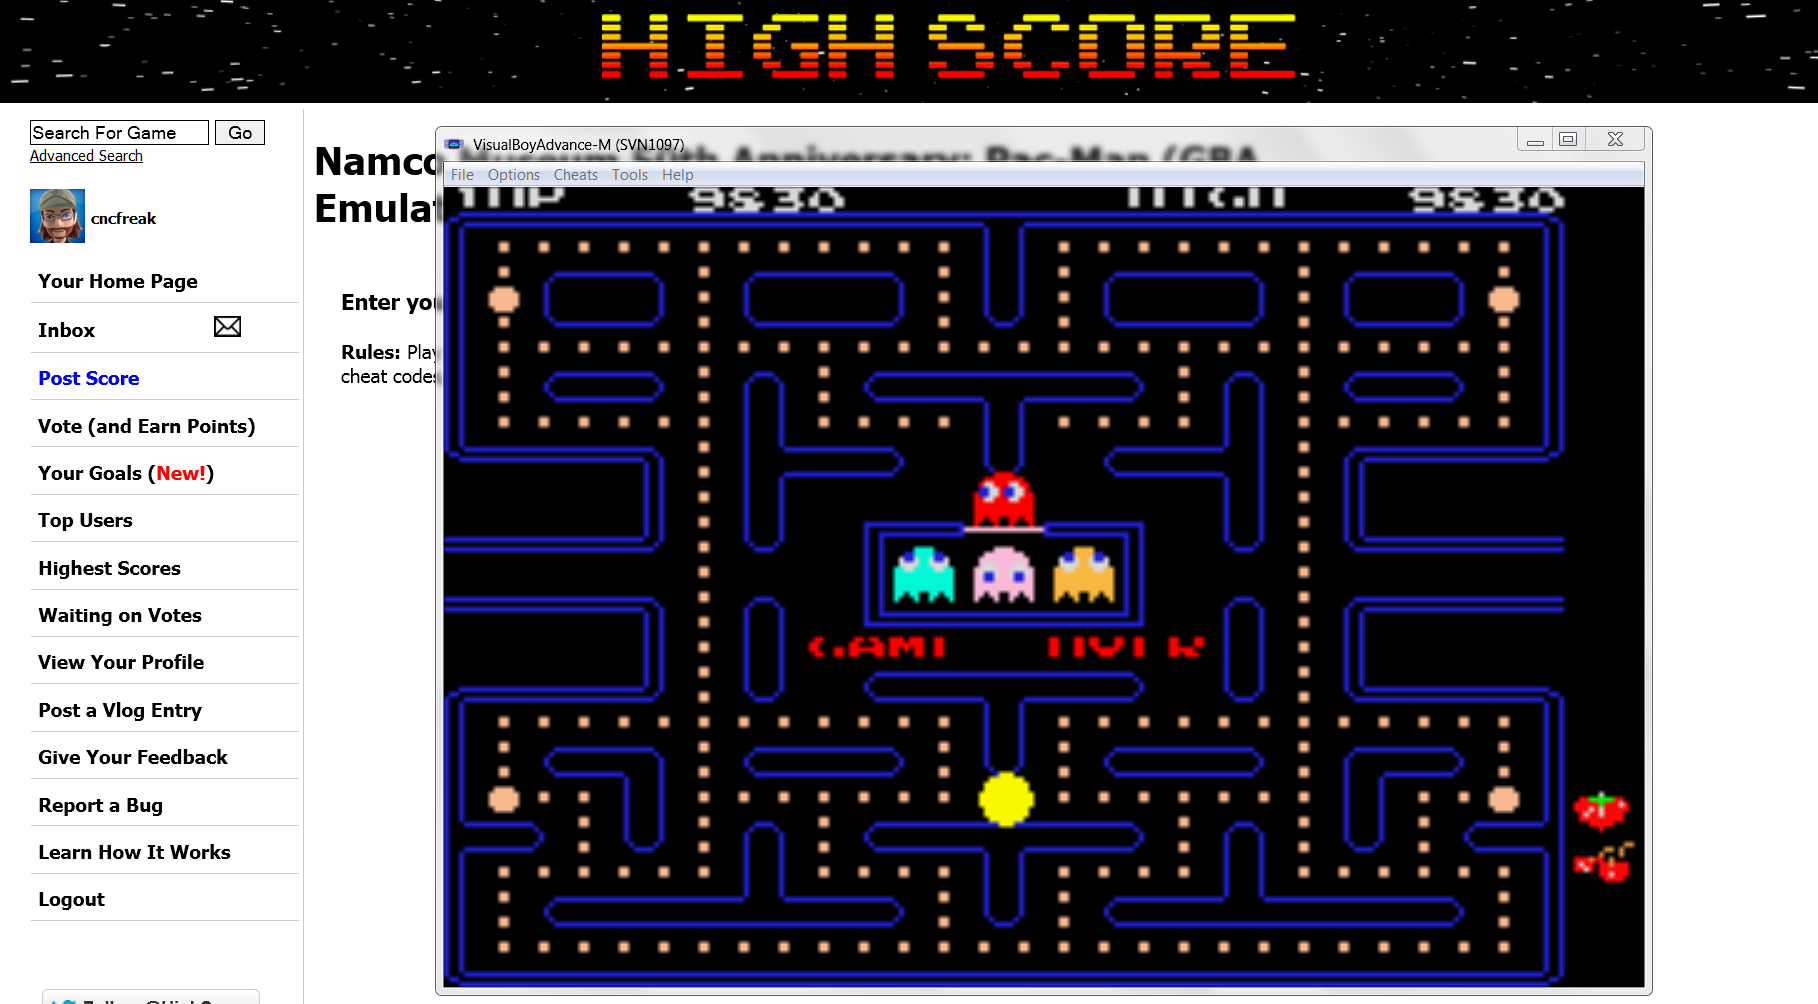 cncfreak: Namco Museum 50th Anniversary: Pac-Man (GBA Emulated) 9,830 points on 2014-03-04 21:43:49